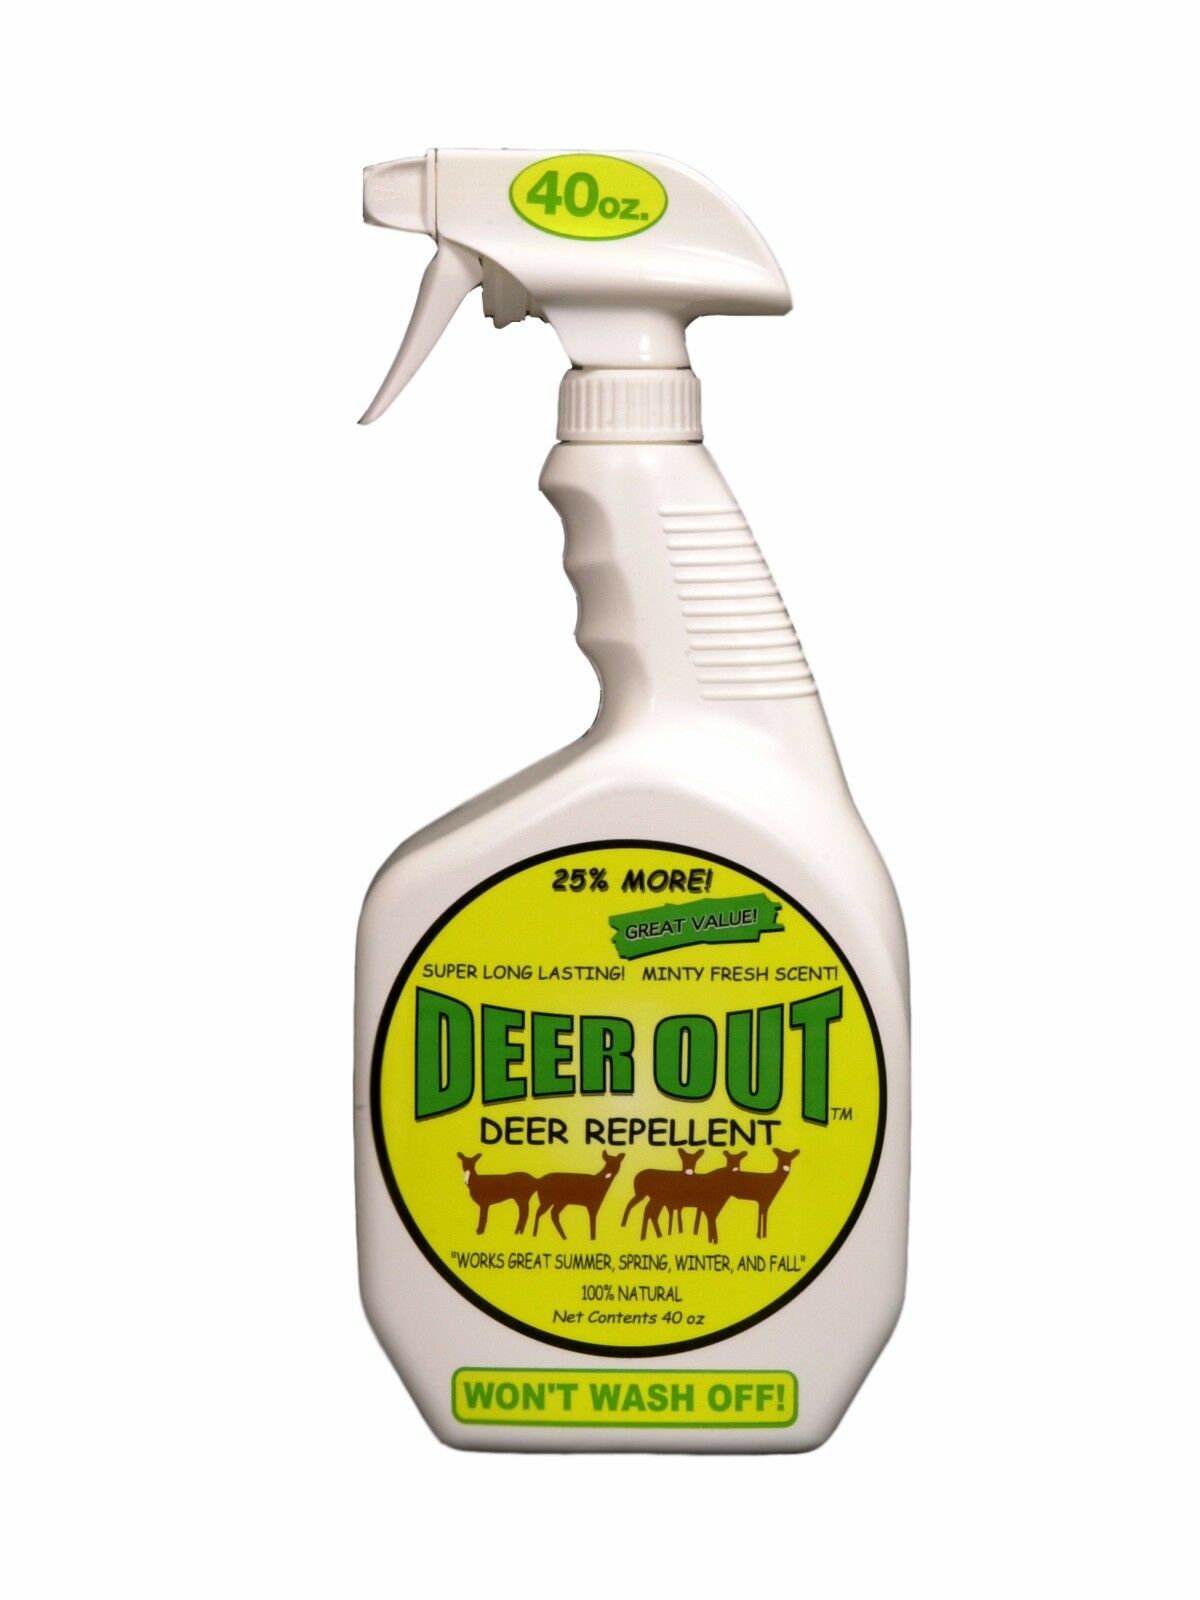 Deer Out 40oz Deer Repellent, New, Free Shipping